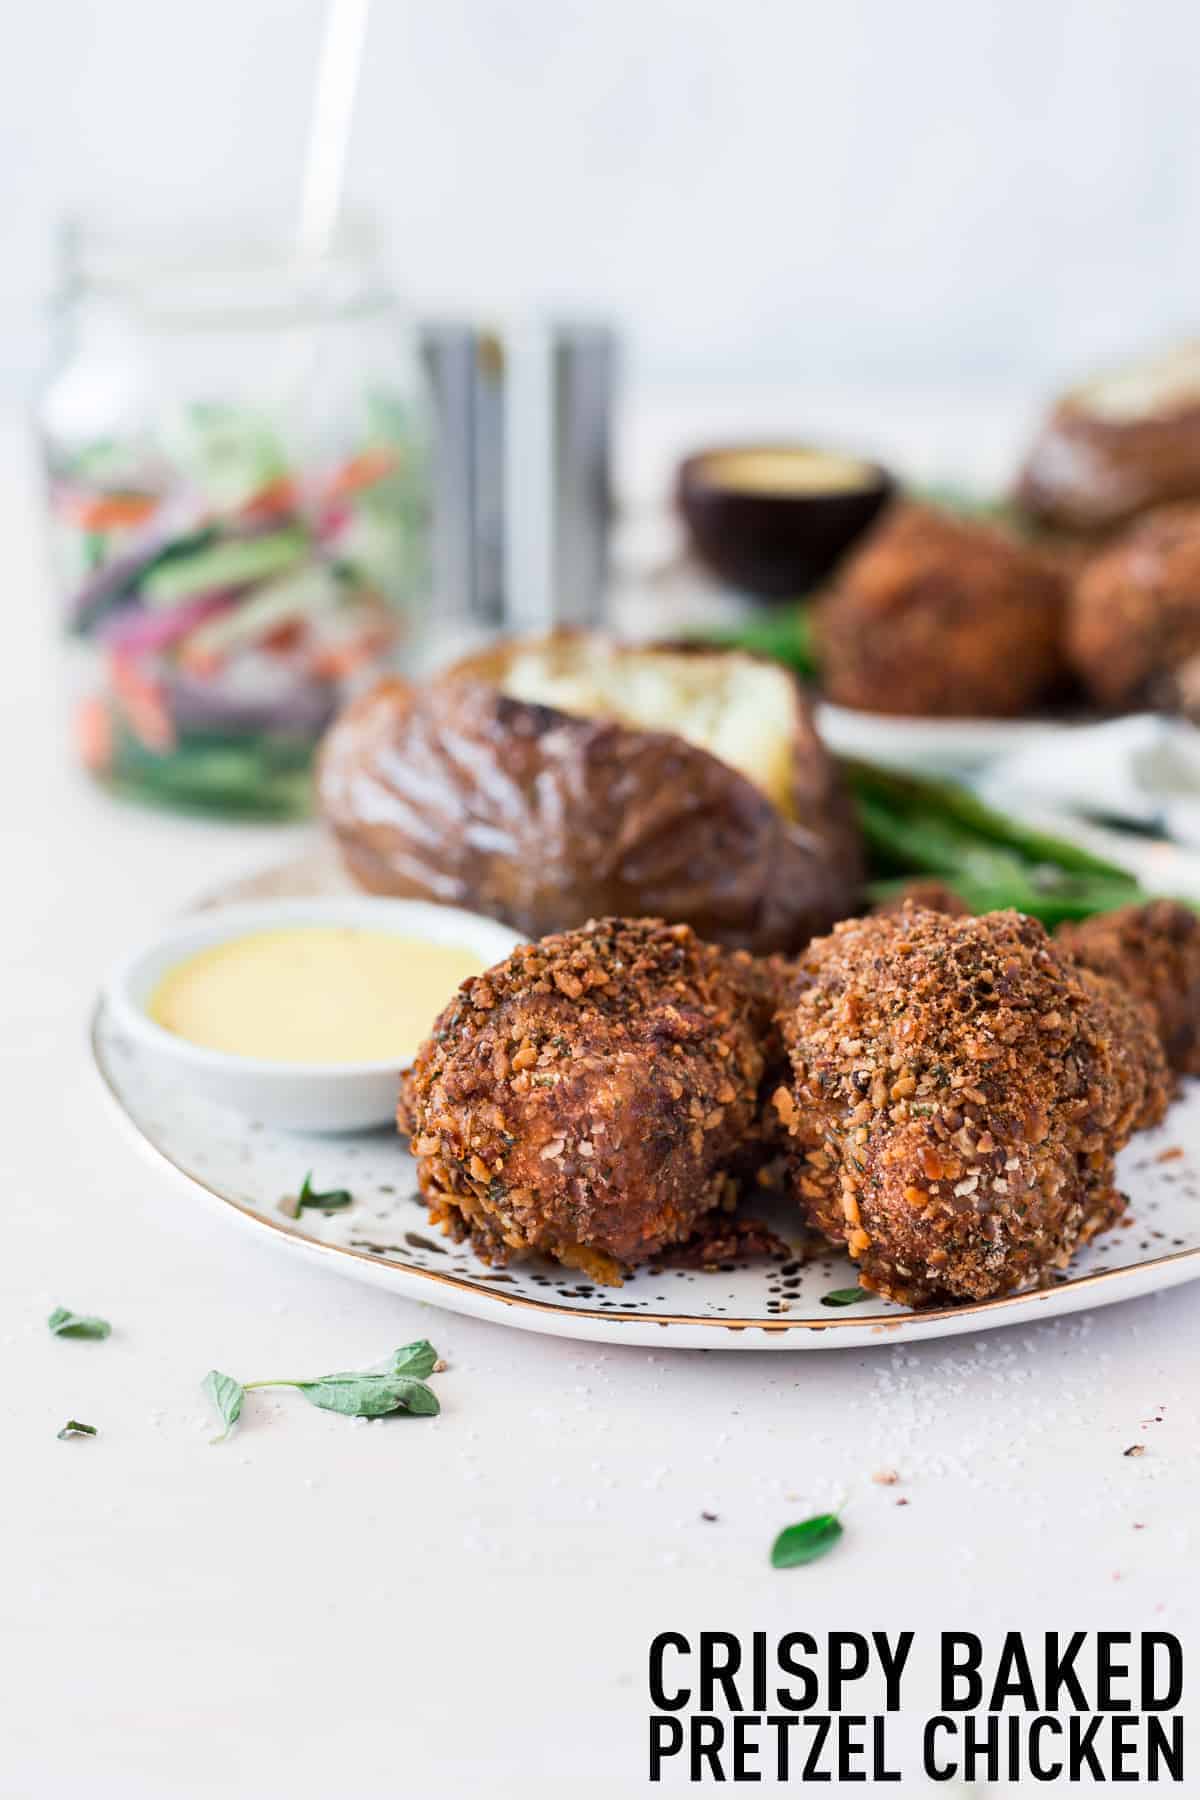 Delicious crispy baked chicken drumsticks made with a homemade pretzel and spices coating which makes the crispiest chicken legs on the block, no frying needed! 